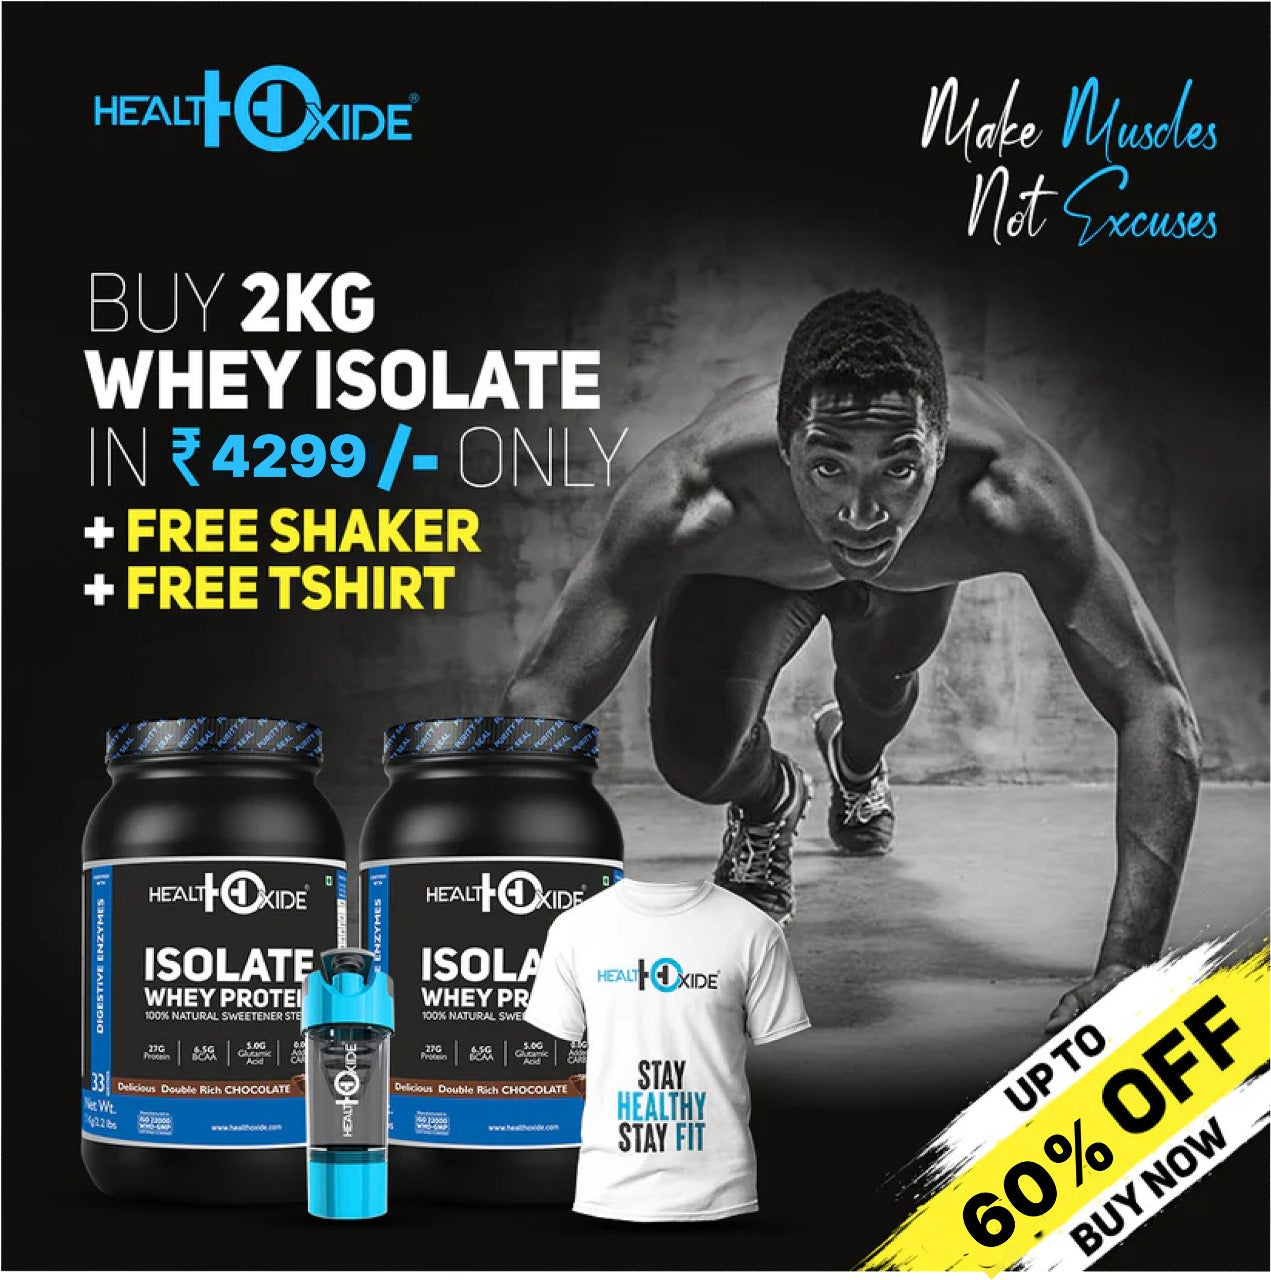 2Kg WHEY ISOLATE with Free Shaker or Free Tshirt